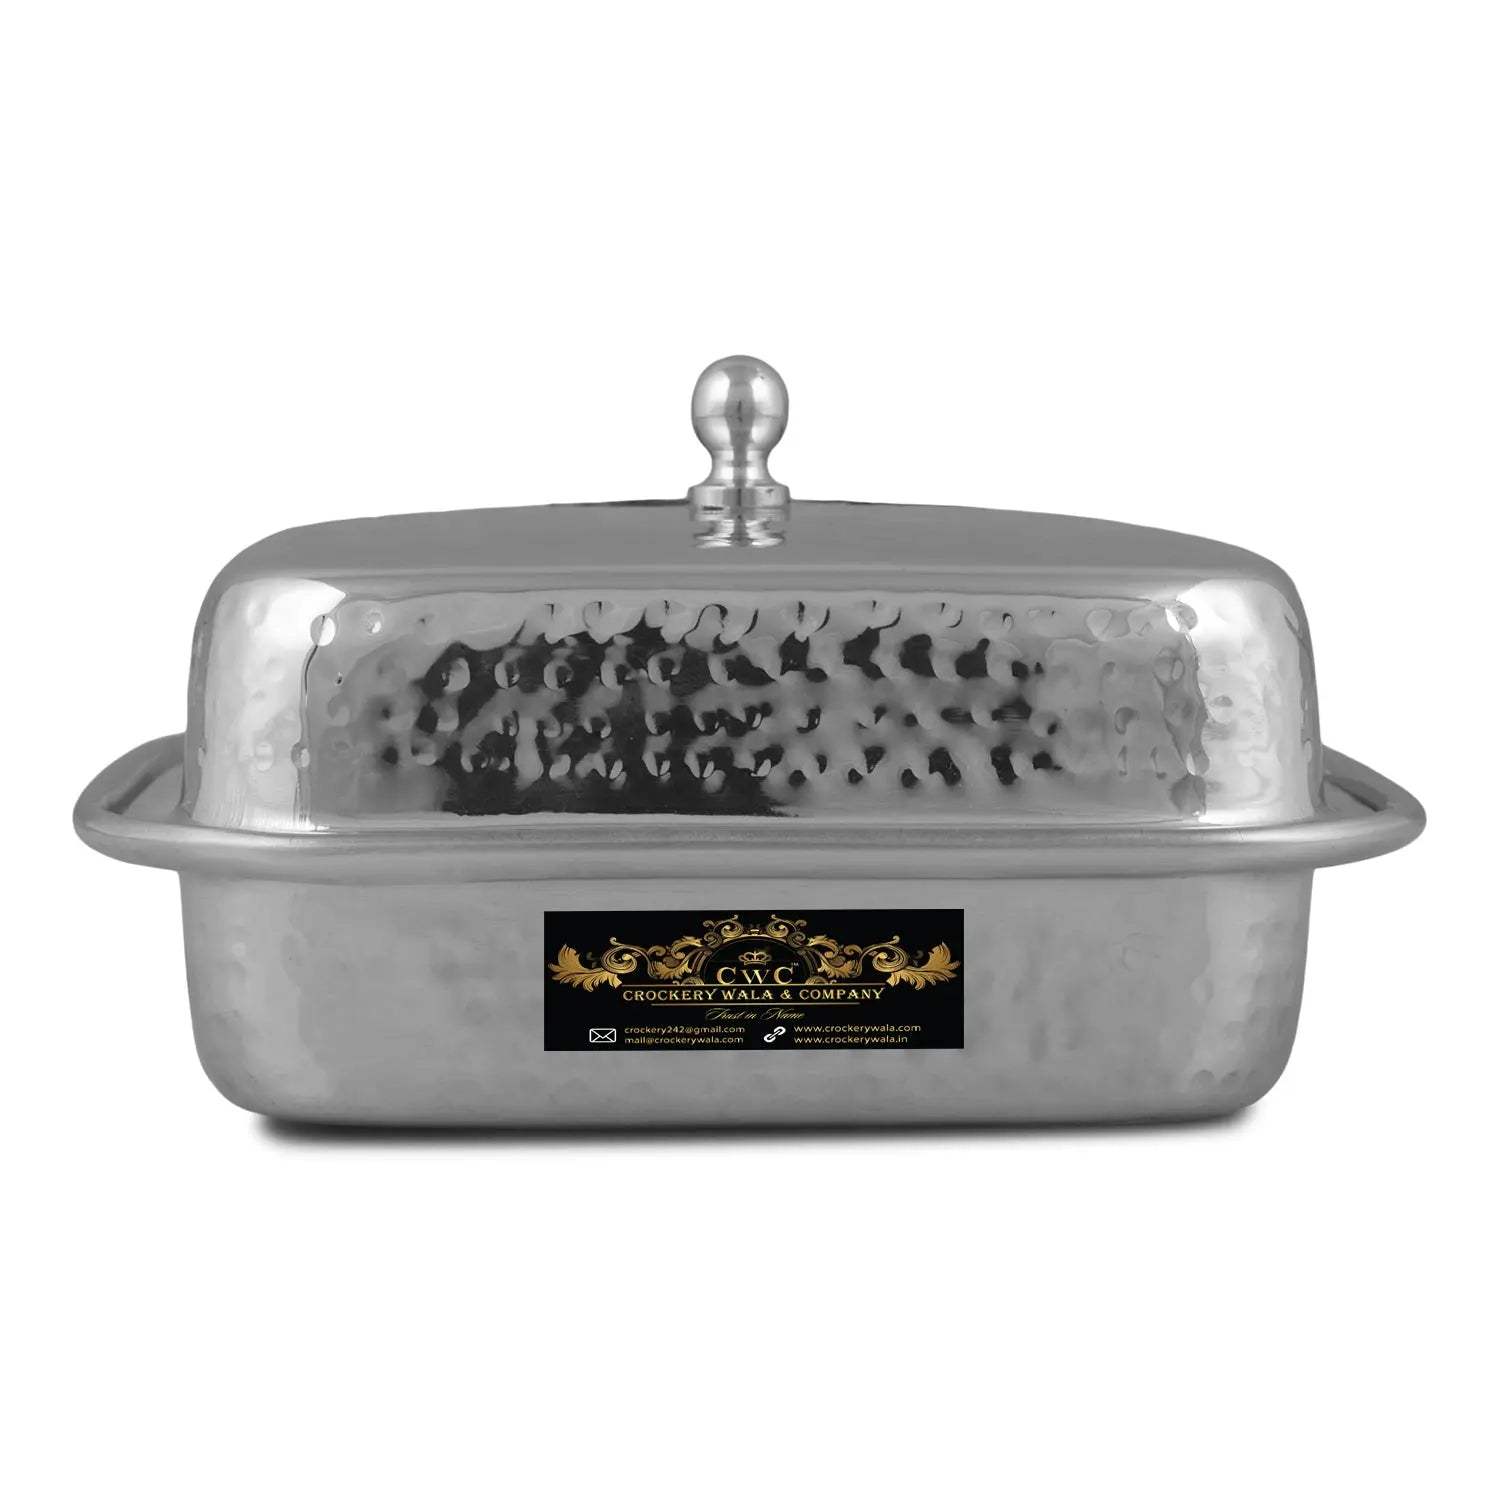 Crockery Wala And Company Stainless Steel Entry Dish Hammered Design Square Snacks Serving Dish With Lid - CROCKERY WALA AND COMPANY 